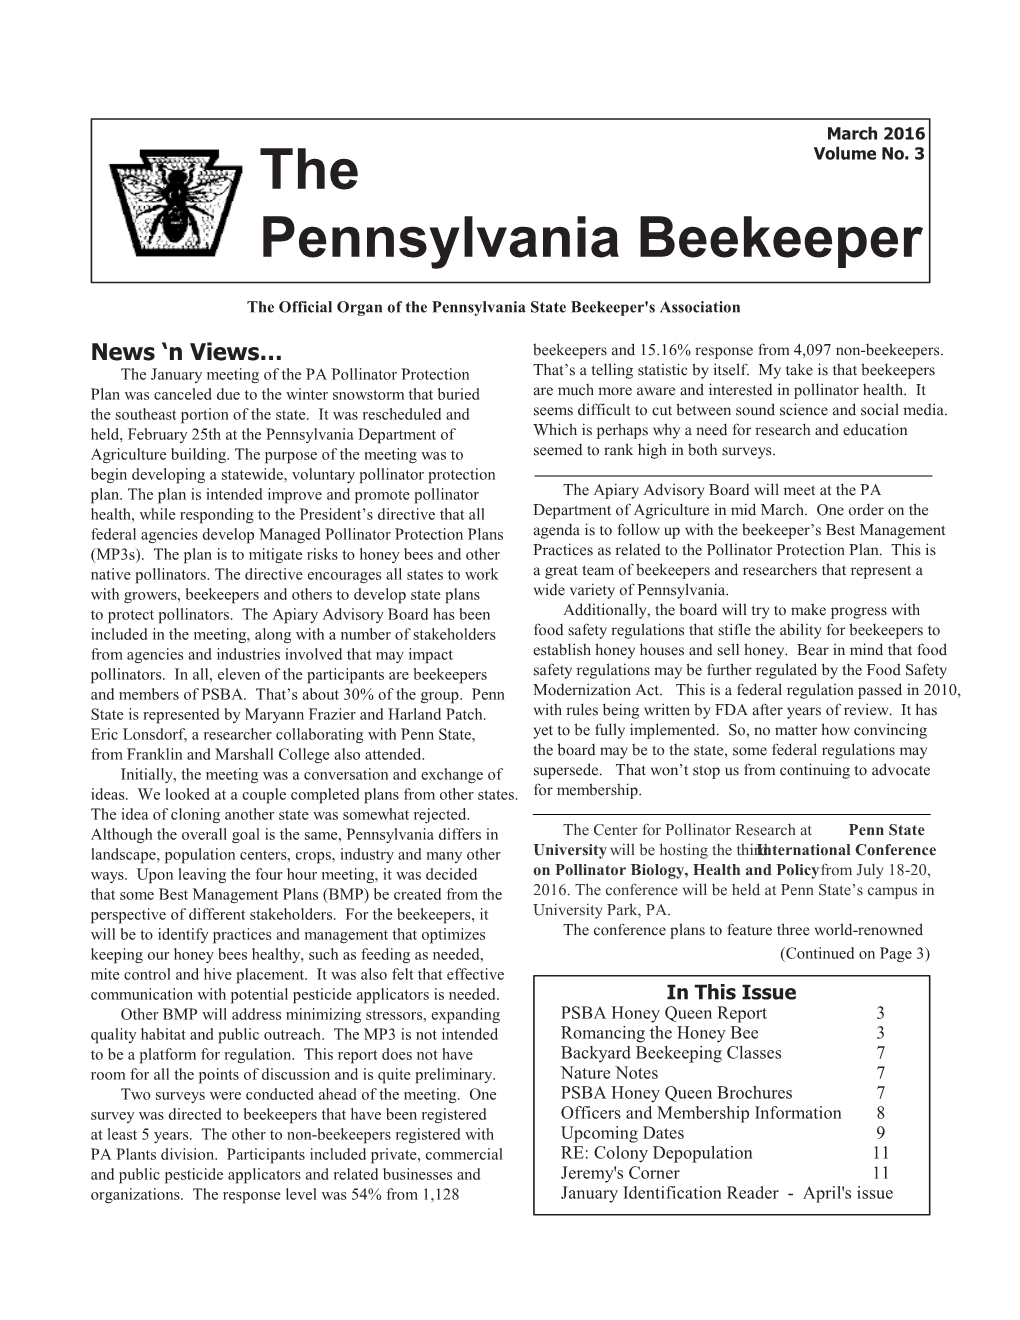 The Pennsylvania Beekeeper March 2016/Page 3